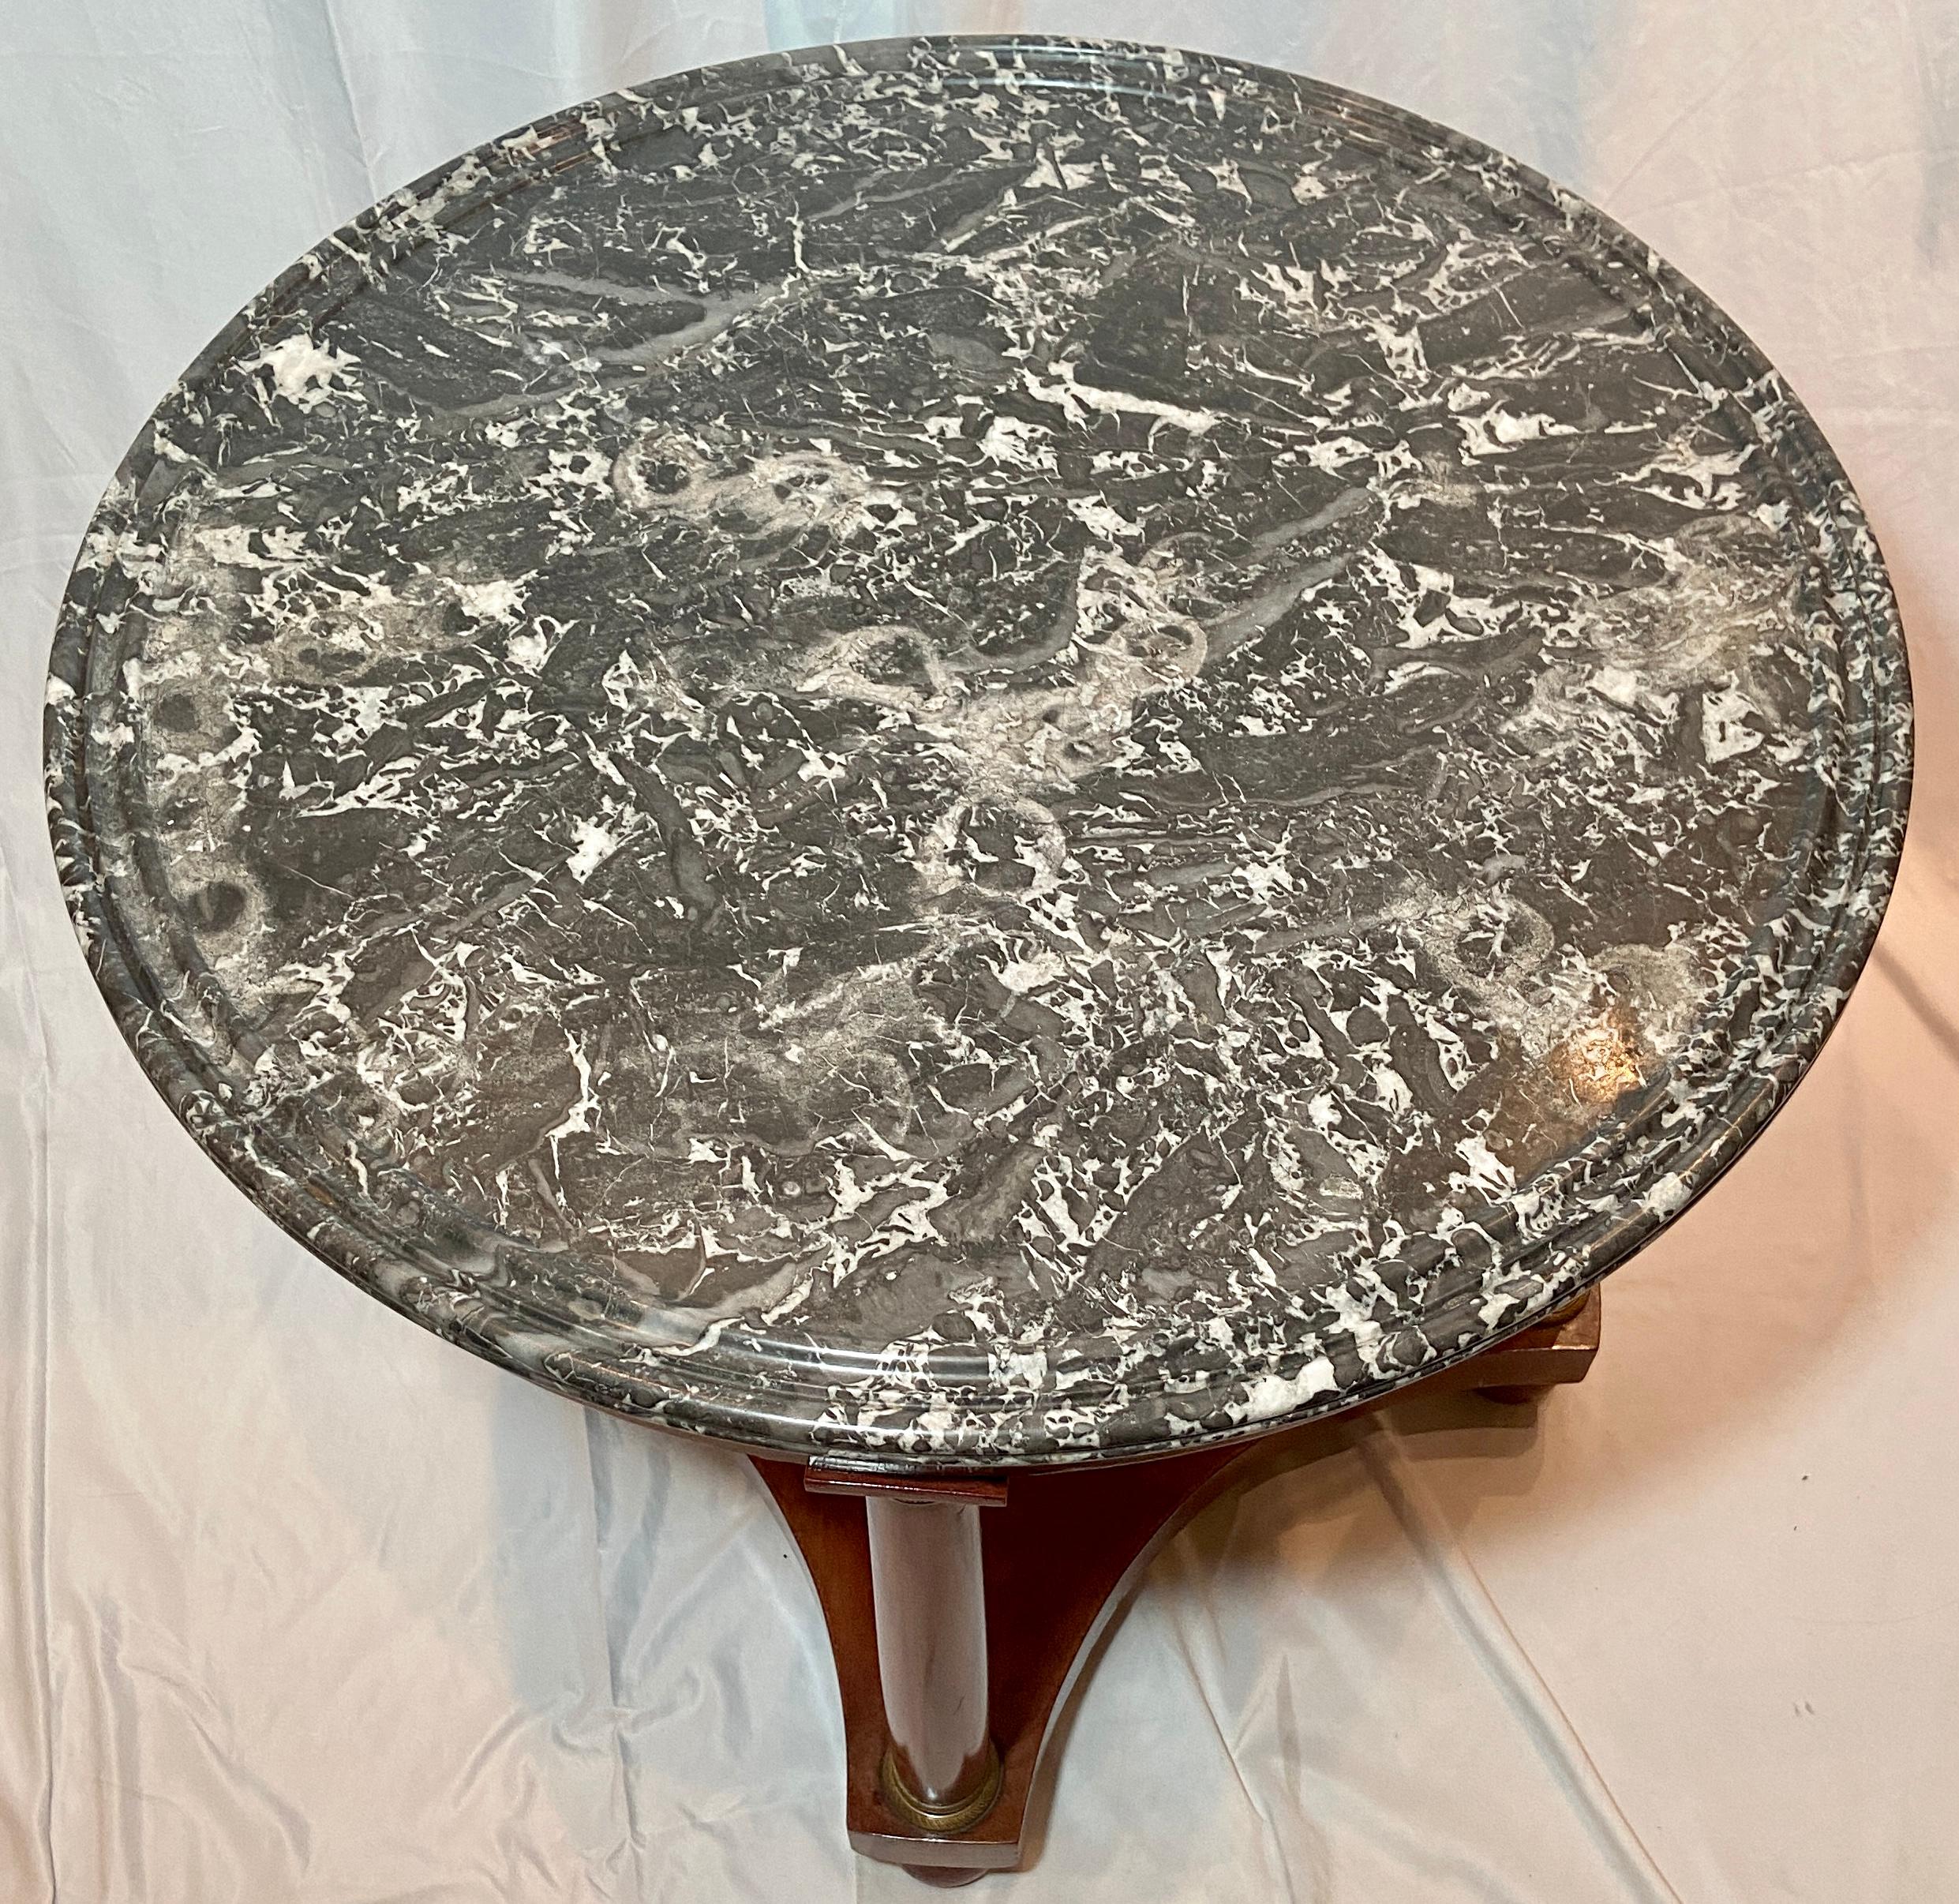 Antique French Empire Bronze Mounted Marble-Top Mahogany Center Table Circa 1880 In Good Condition For Sale In New Orleans, LA